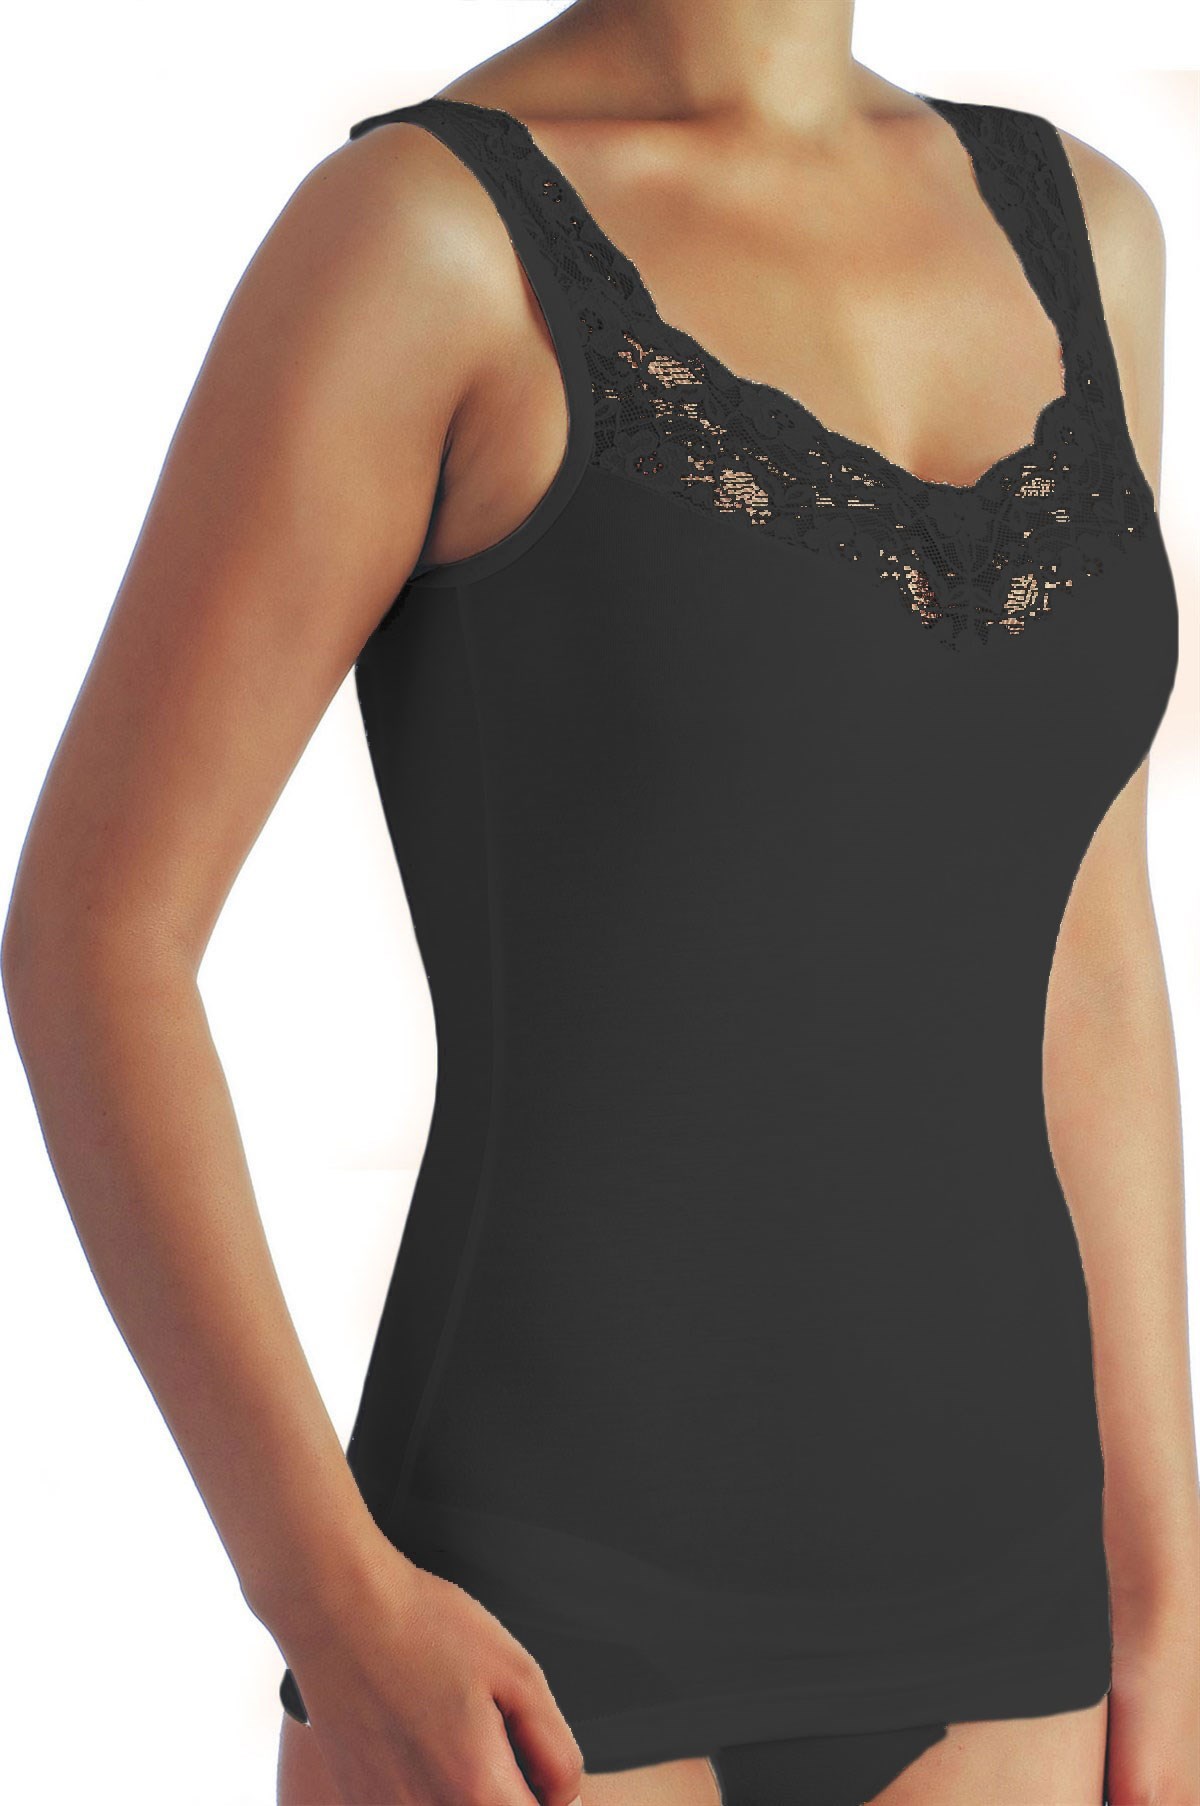 Cotton Modal Lace V Neck Thick Strapped Undershirt Black FA2030